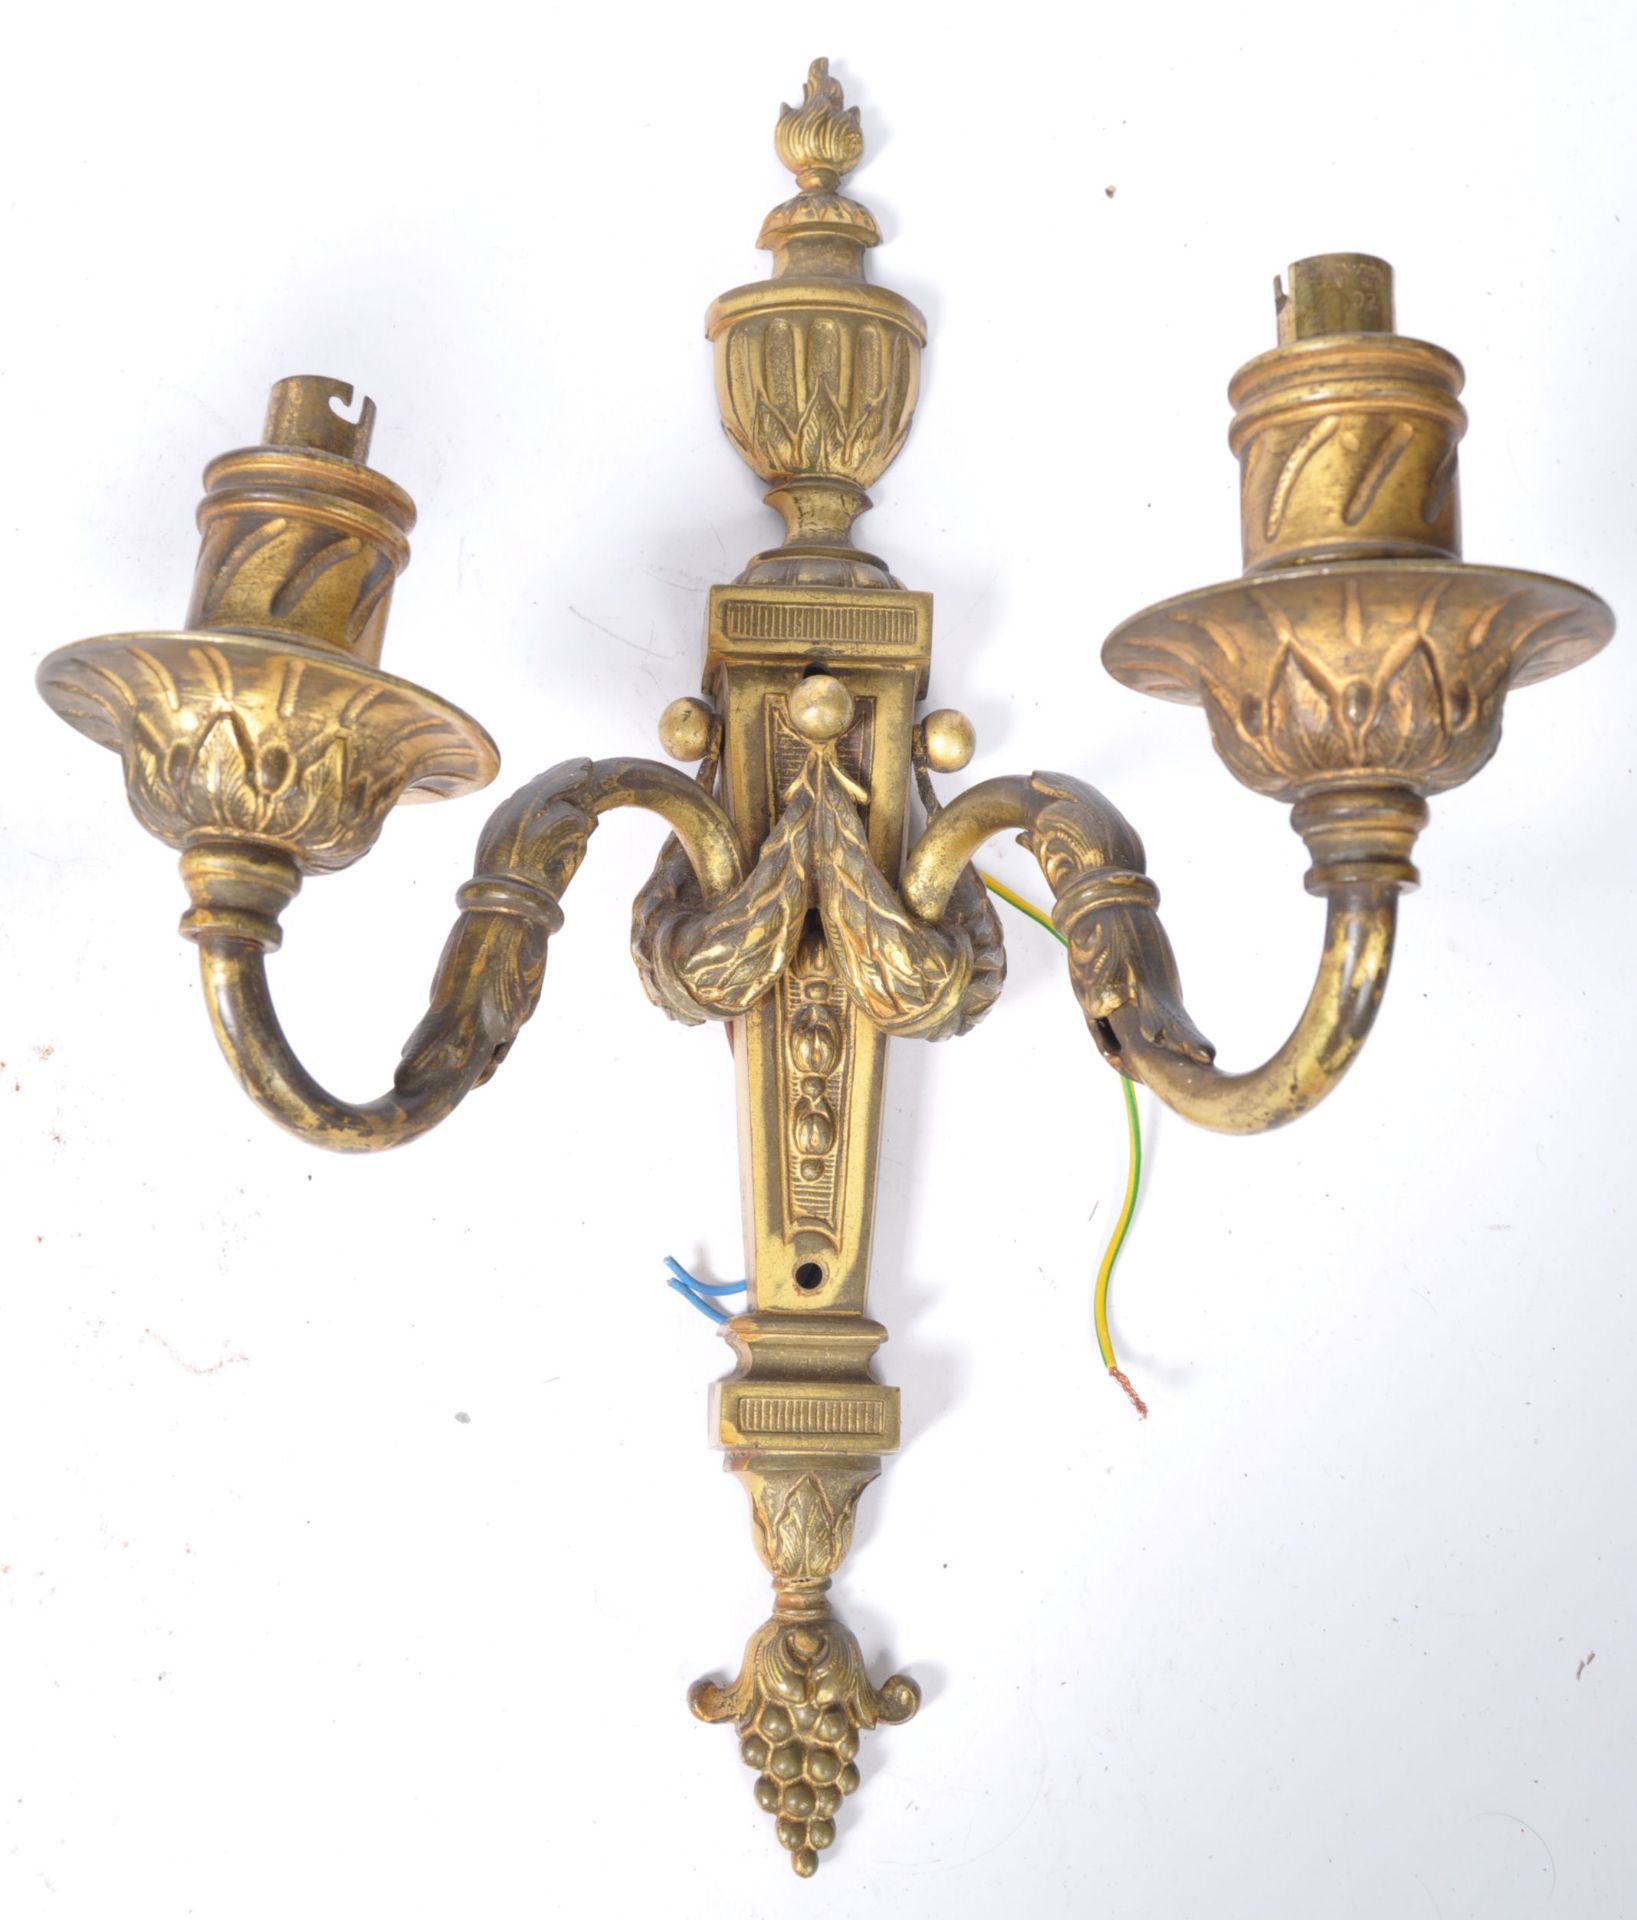 PAIR OF EDWARDIAN GILT BRONZE WALL LIGHTX IN THE ADAM STYLE - Image 2 of 5